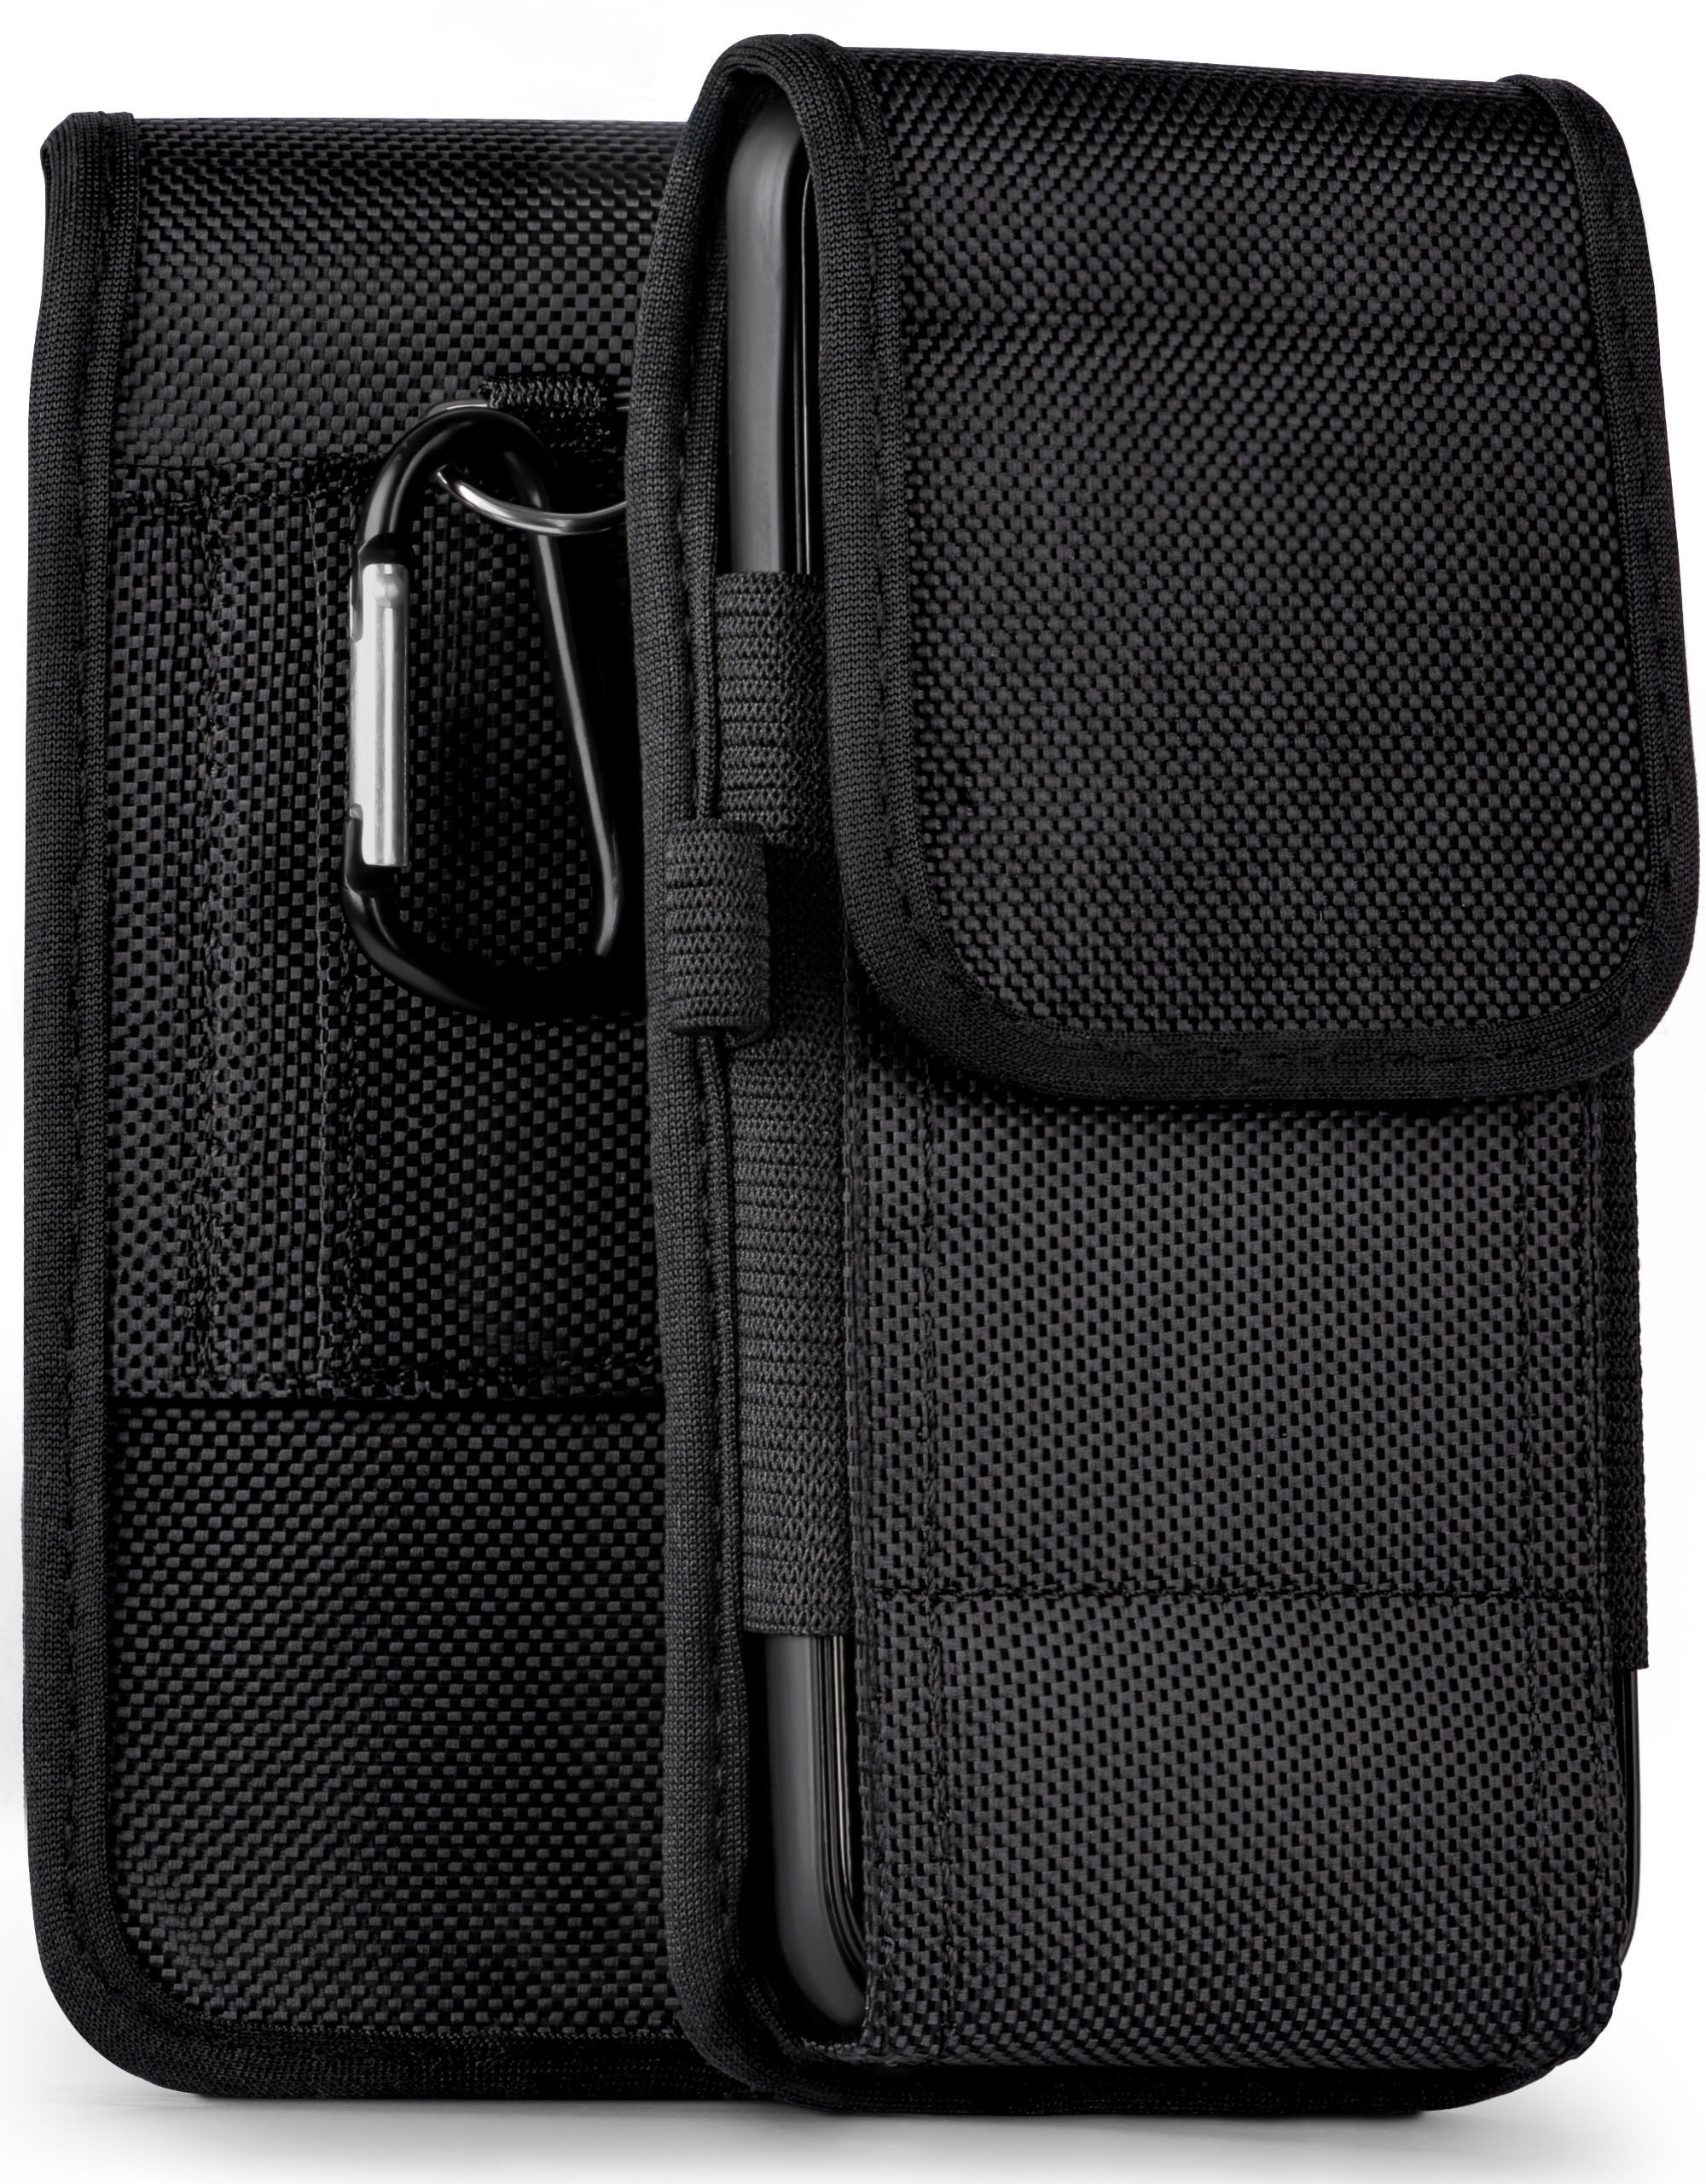 MOEX Agility Case, Holster, Gigaset, Plus, / GS270 GS270 Trail